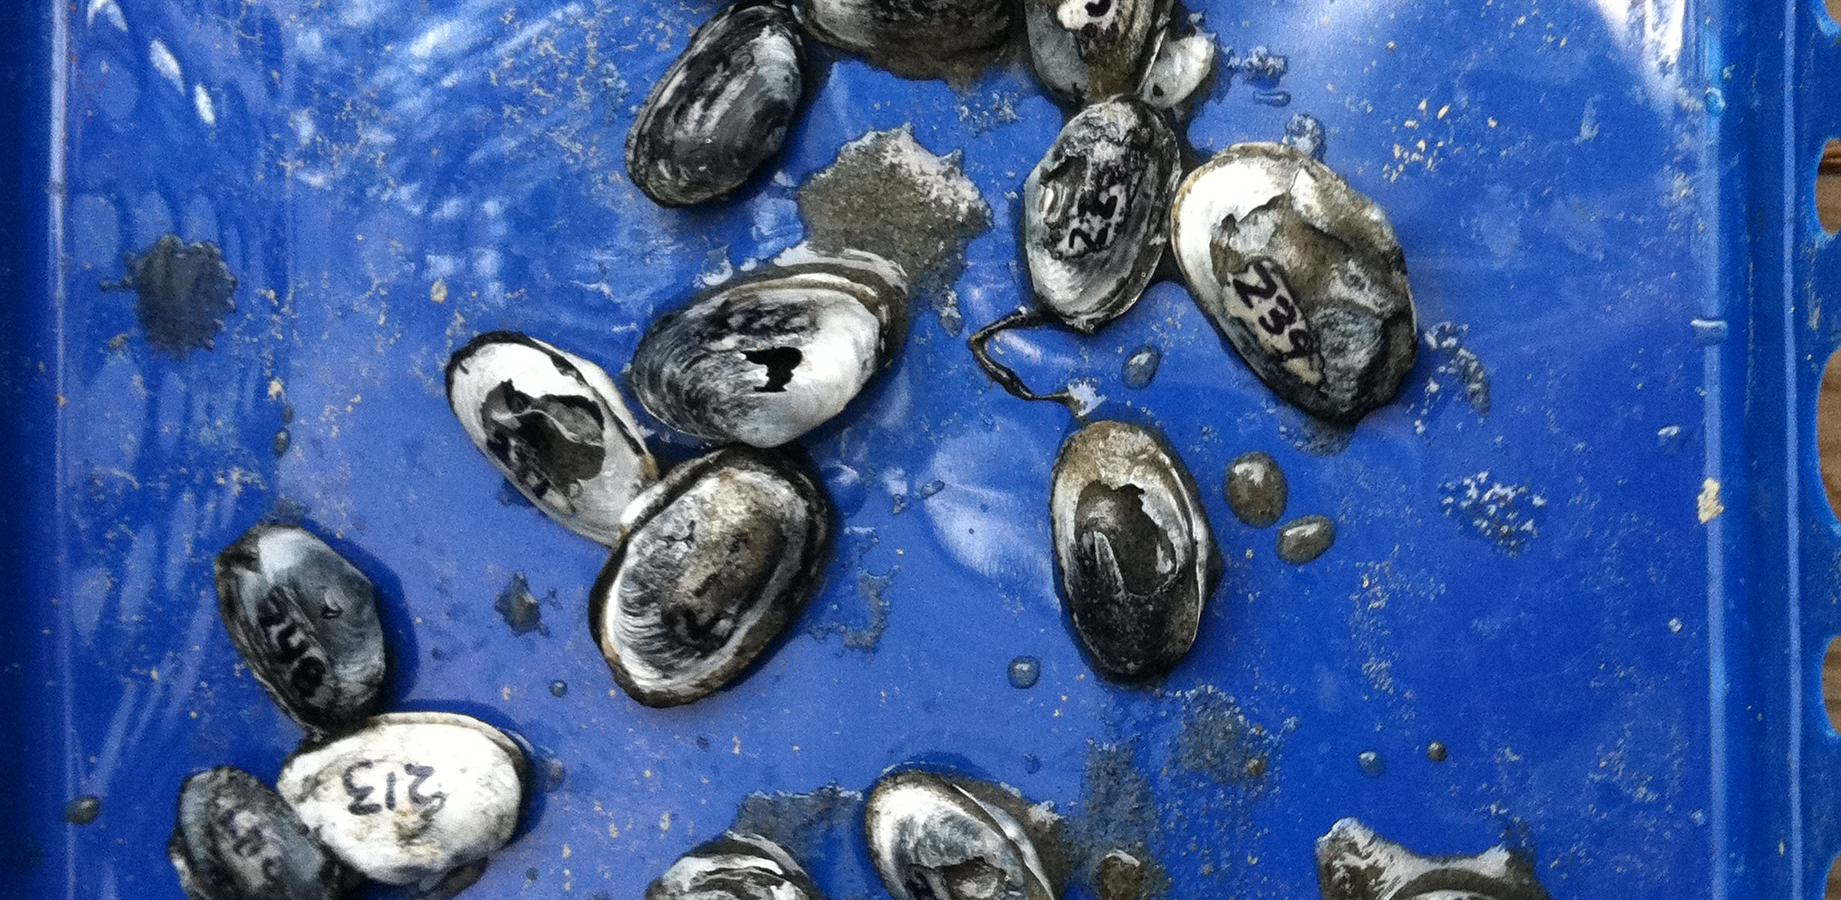 Photo of clams that were placed in acidified waters.